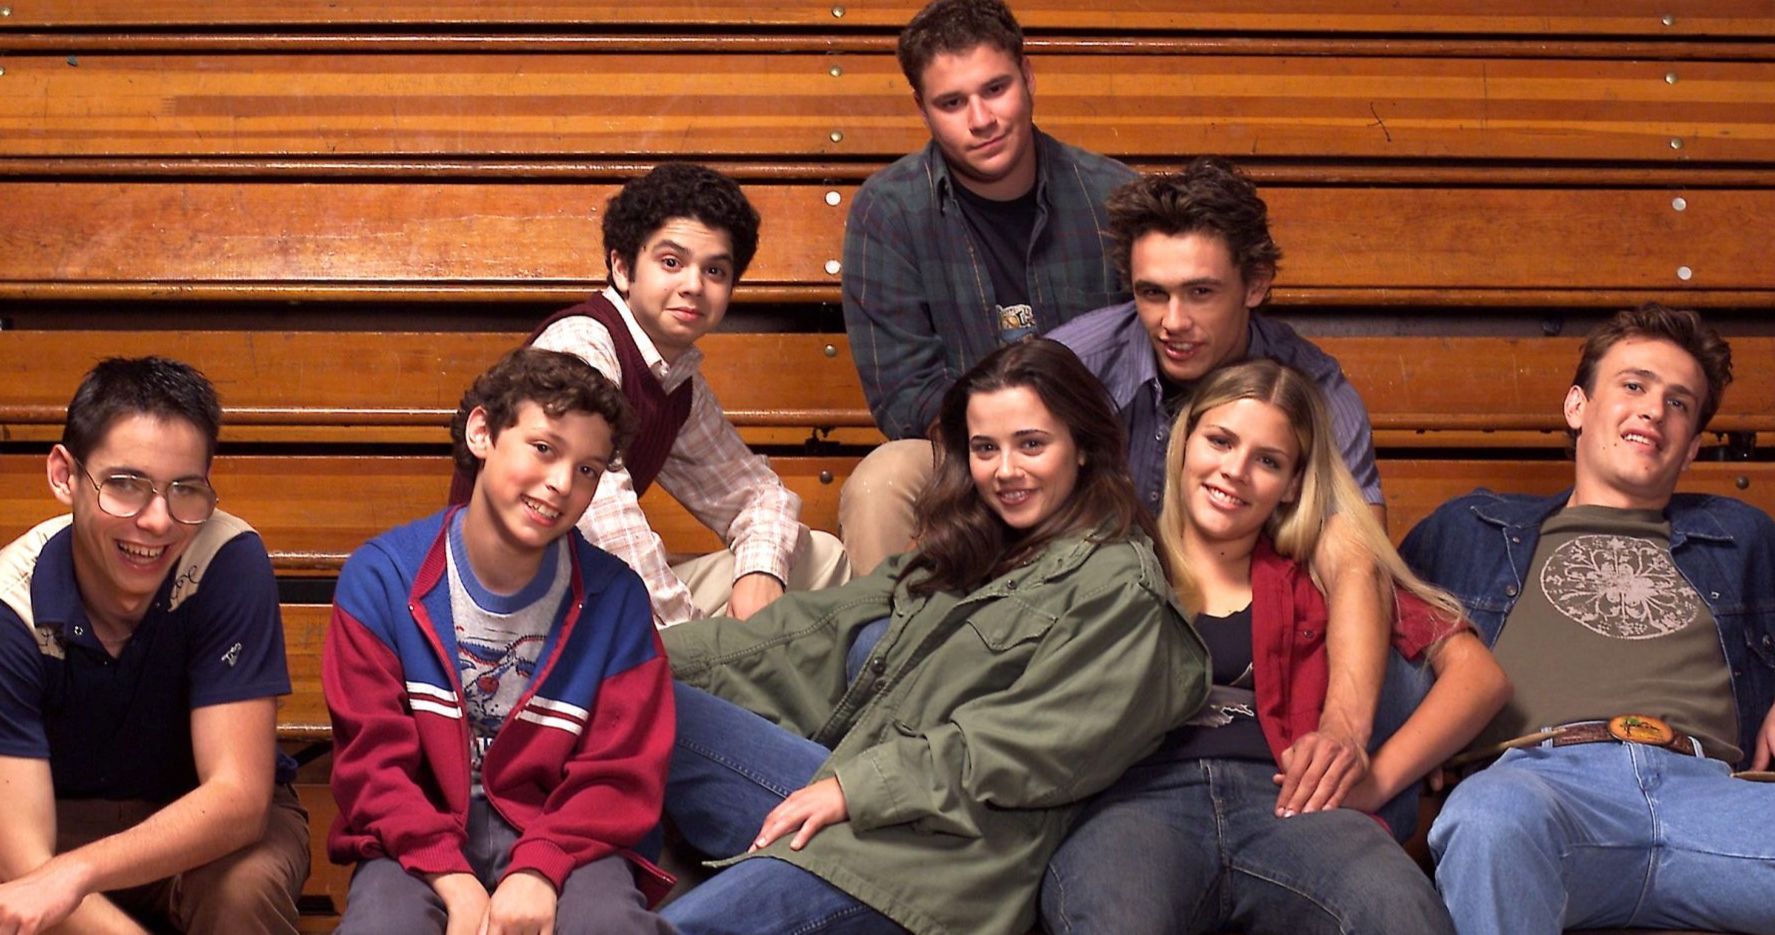  the Cast of Freaks and Geeks sit in the bleachers